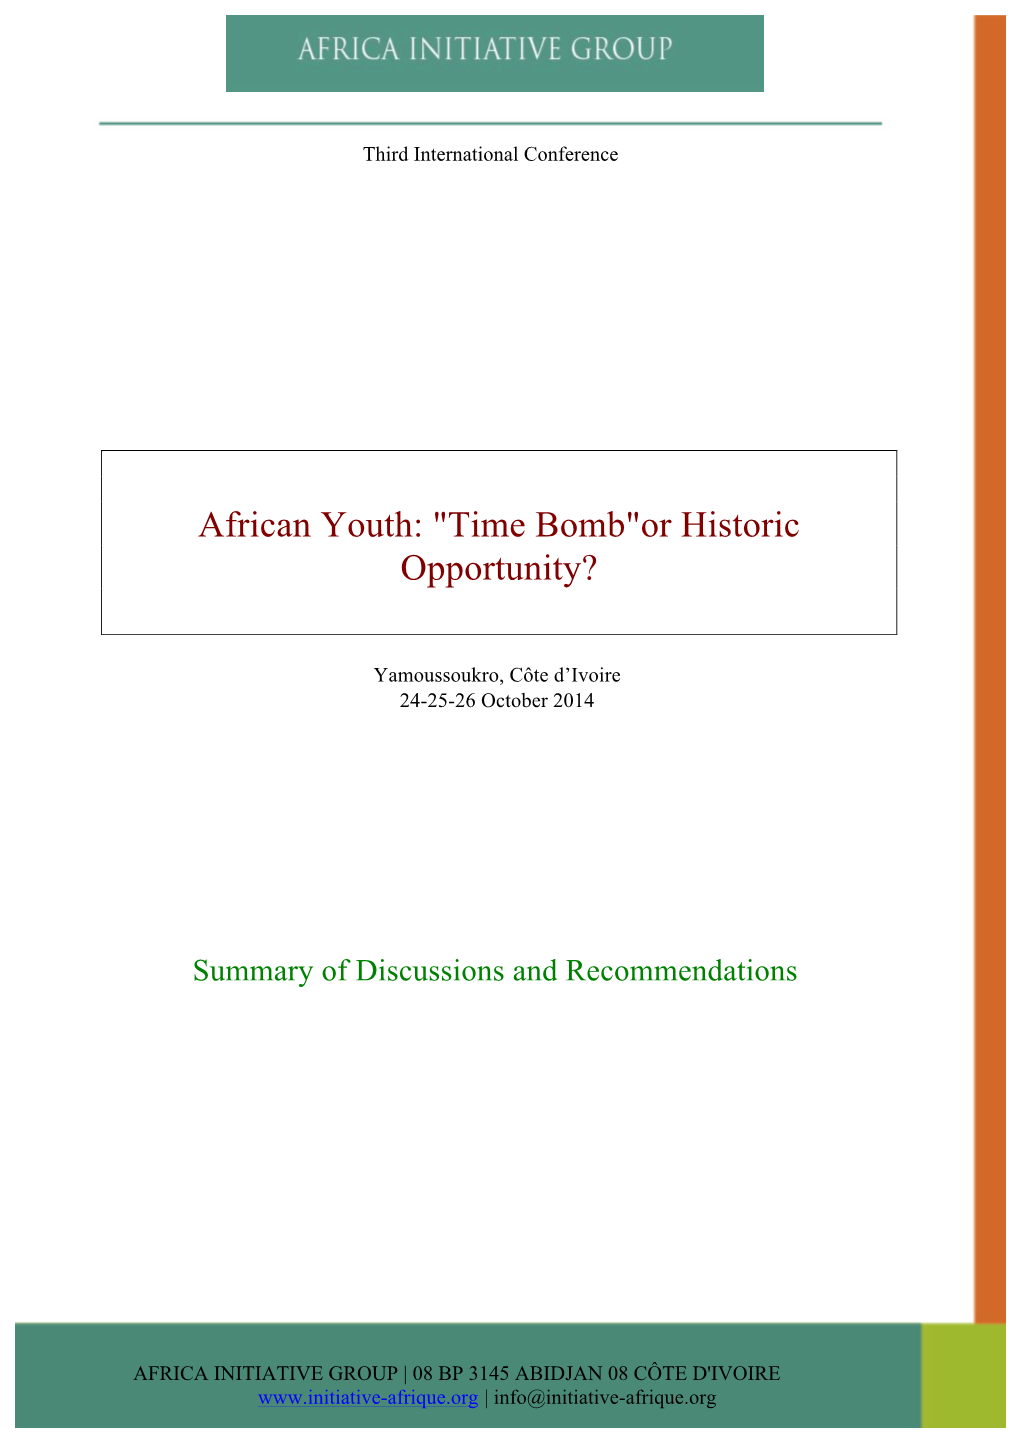 African Youth: "Time Bomb"Or Historic Opportunity?